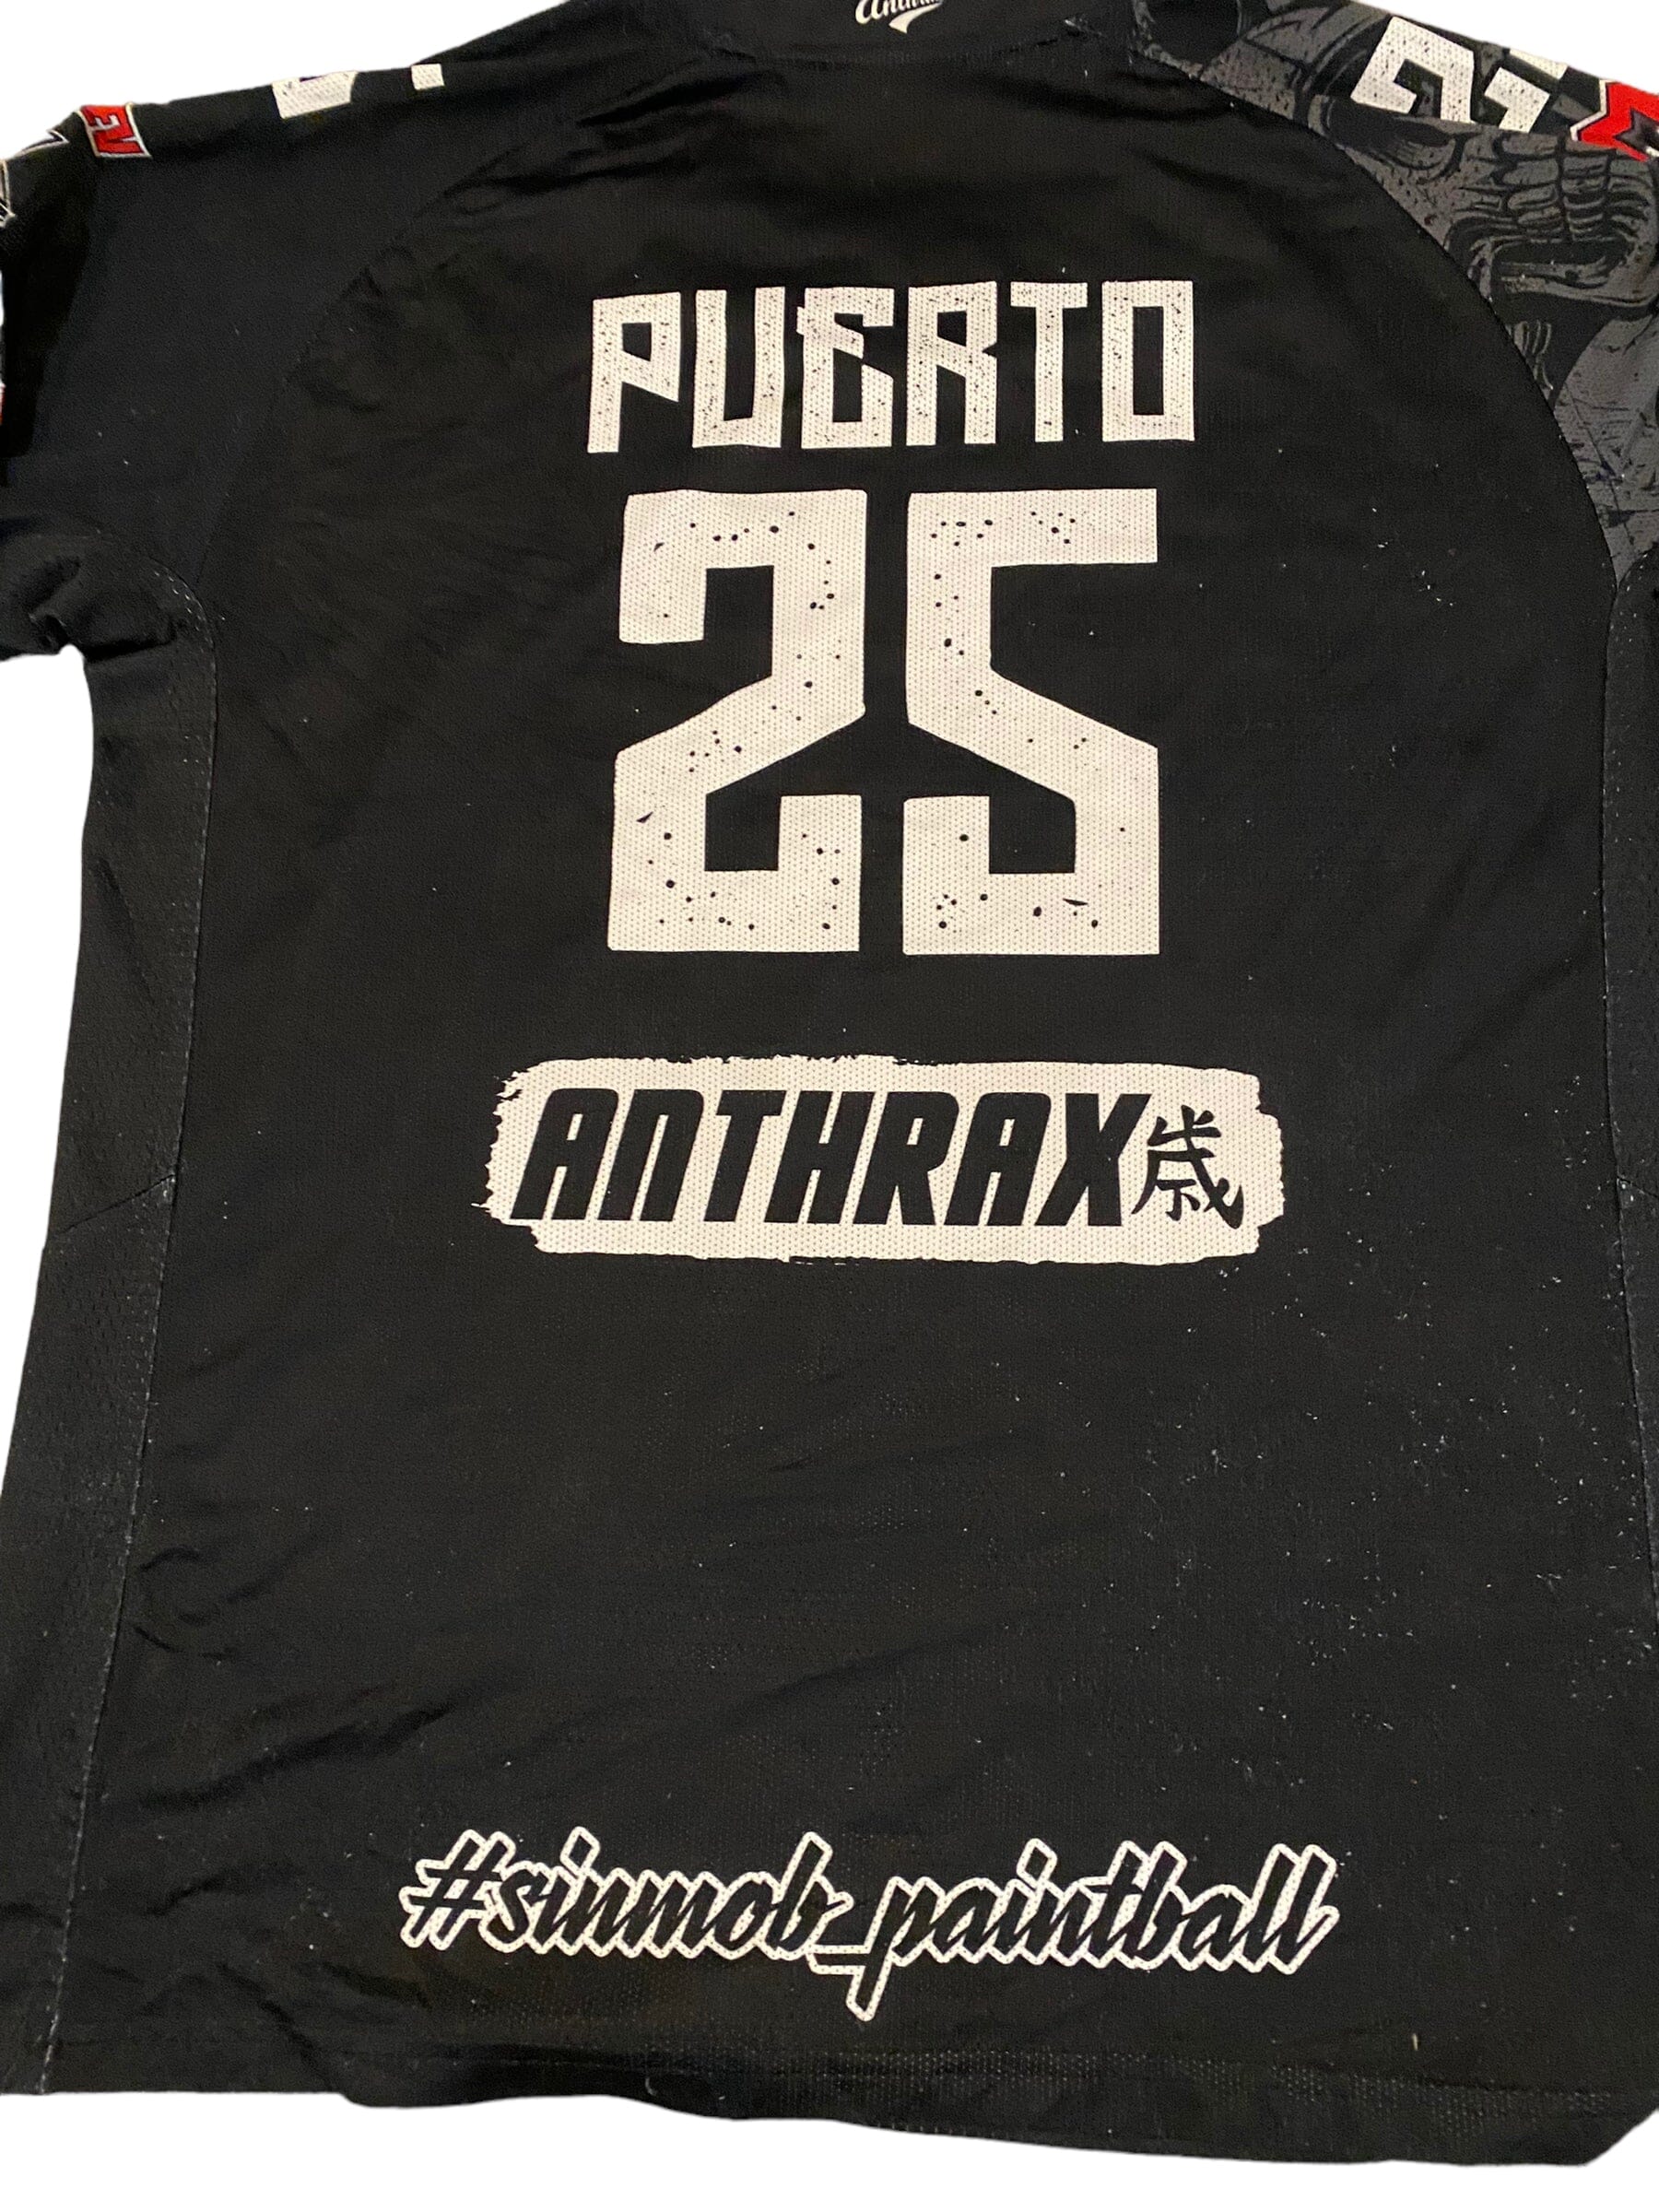 Used Anthrax SinMob Jersey size L Paintball Gun from CPXBrosPaintball Buy/Sell/Trade Paintball Markers, Paintball Hoppers, Paintball Masks, and Hormesis Headbands